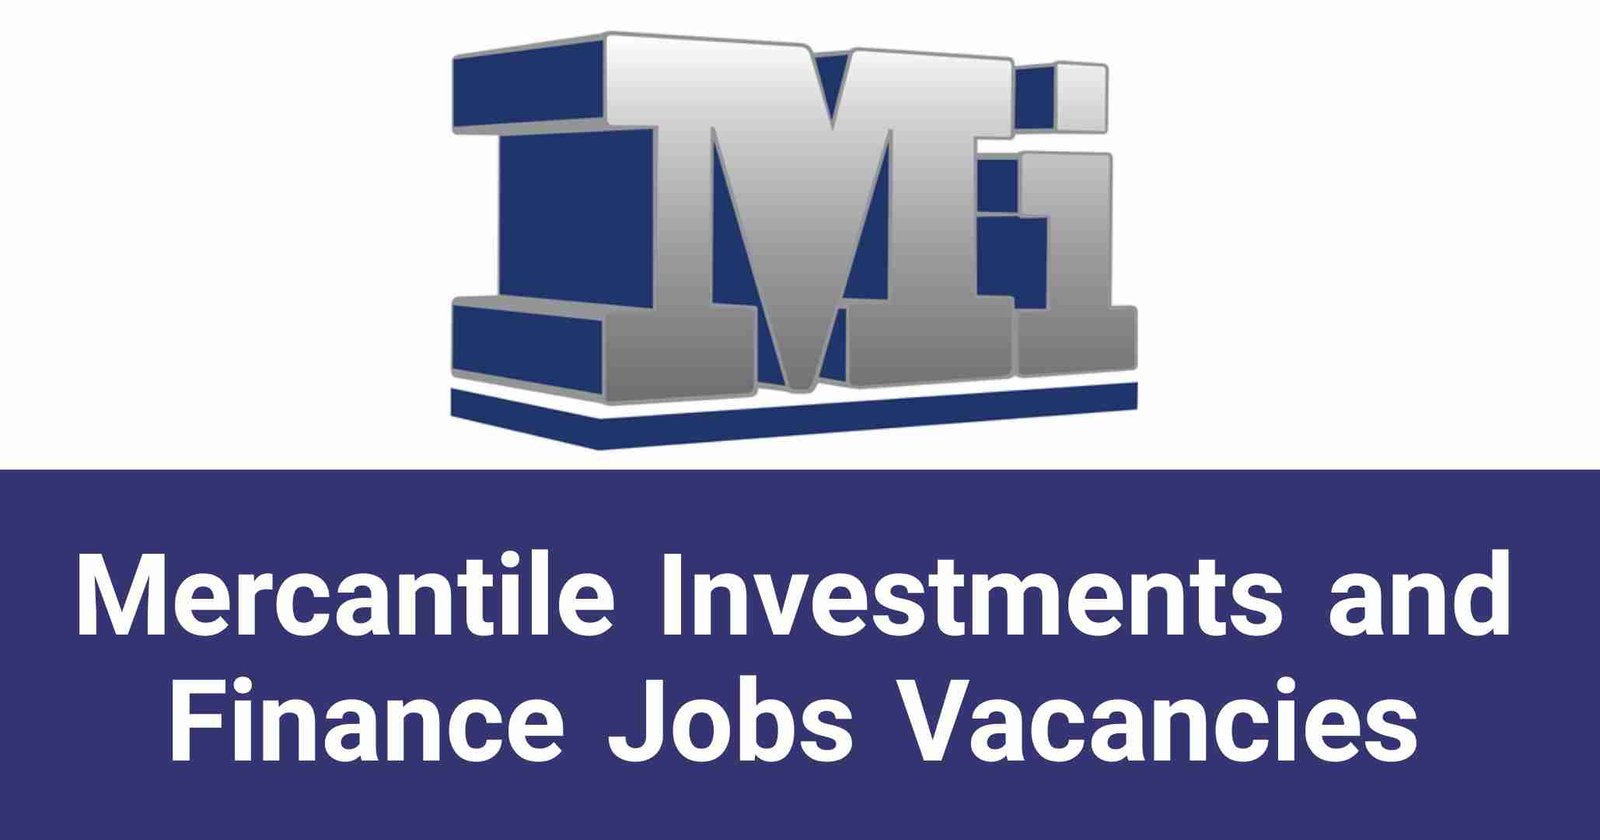 Mercantile Investments and Finance Jobs Vacancies